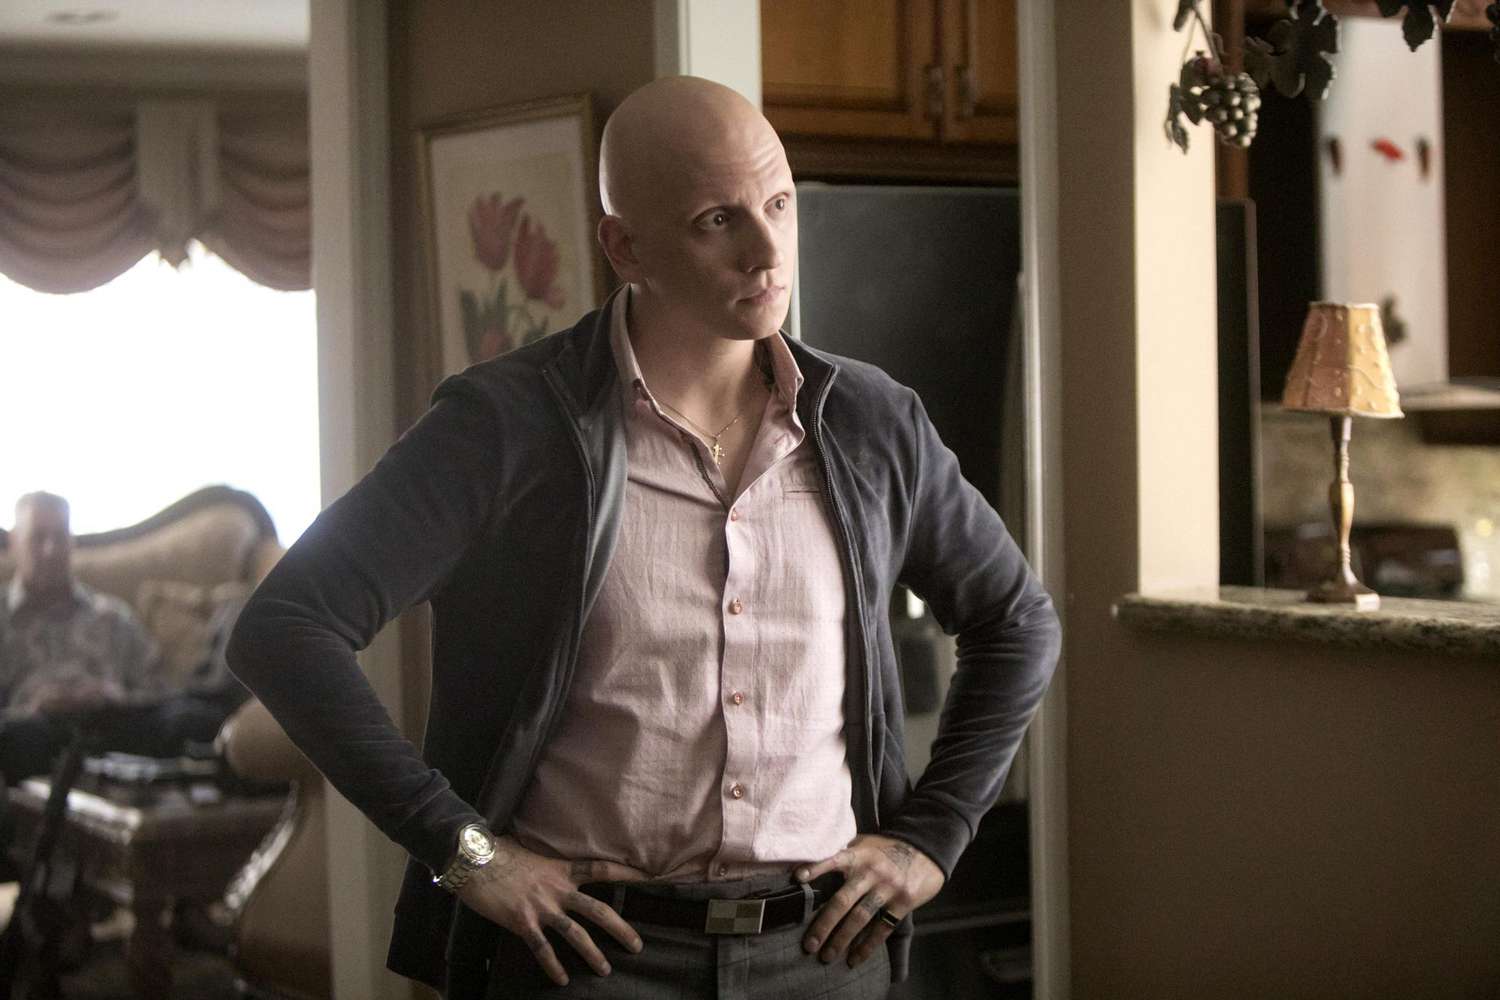 Best Comedy Supporting Actor: Anthony Carrigan - Barry&nbsp;(HBO)